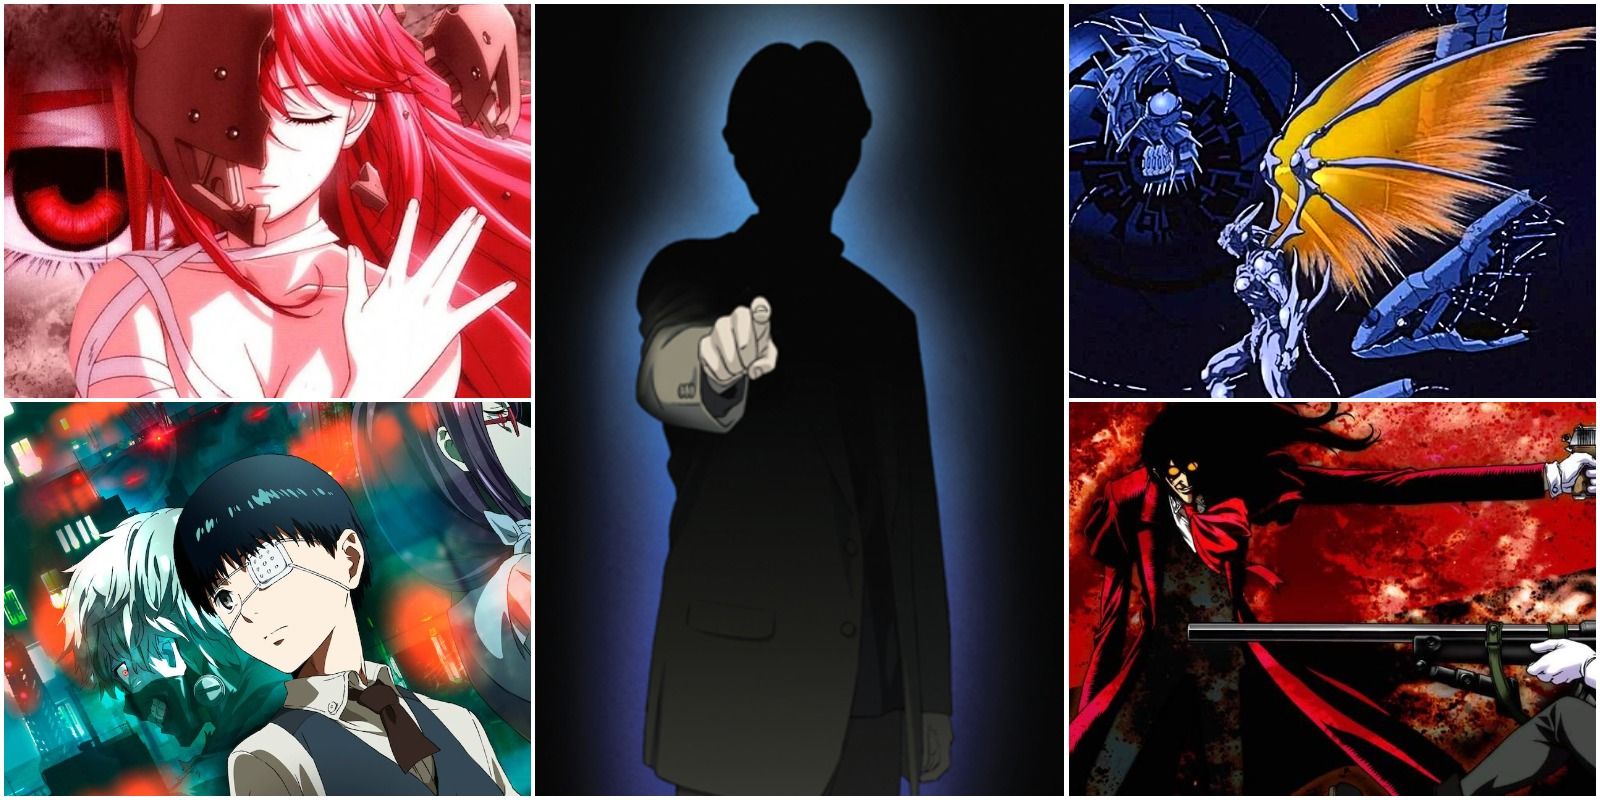 top left: lucy from elfen lied pink background. bottom left: two characters from tokyo ghoul. center: sinister silhouette from monster. top right: monster form of protagonist from genocyber. bottom right: alucard in a red coat from Hellsing ultimate